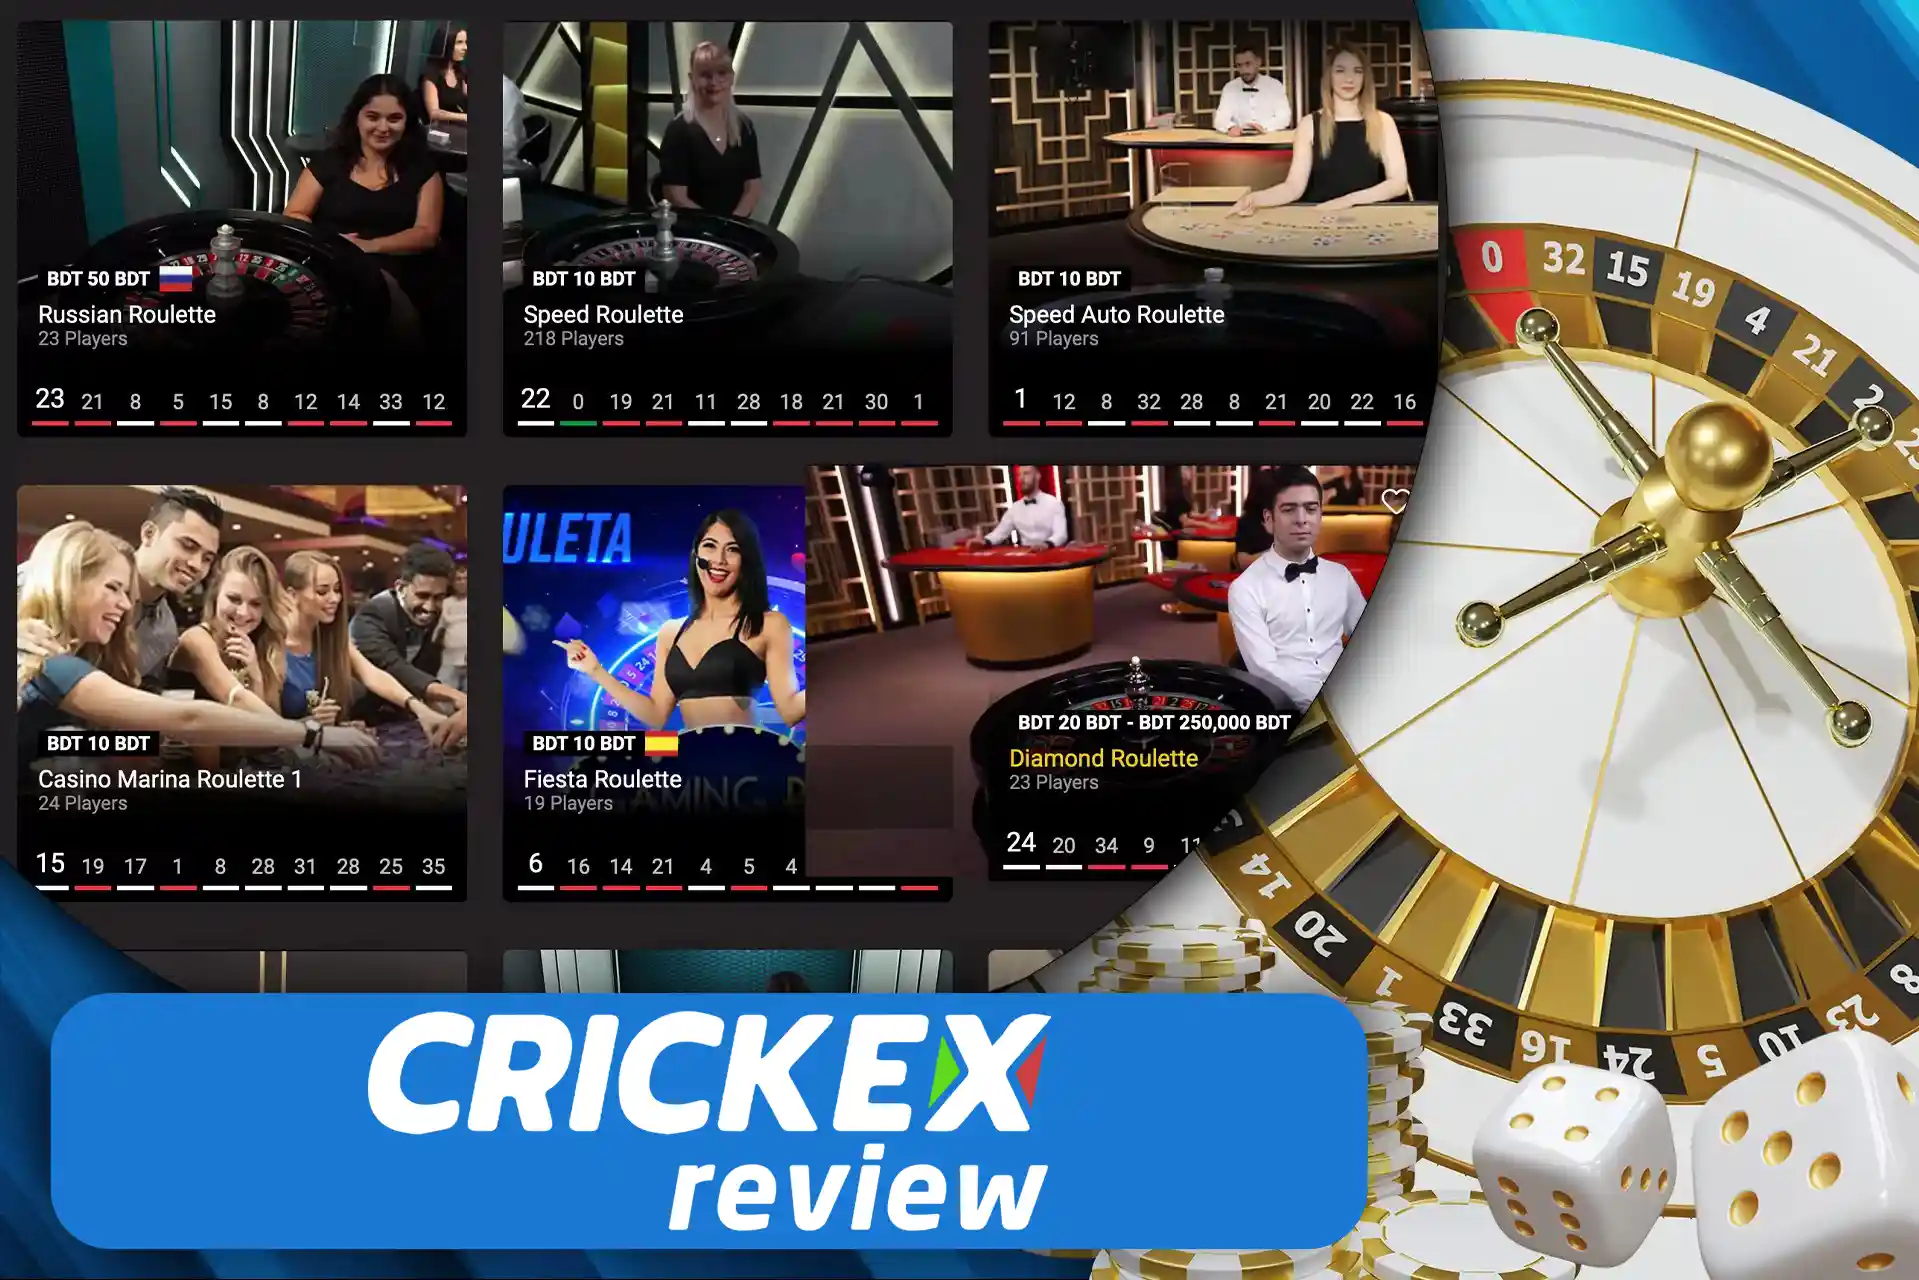 There are different roulette types in the Crickex casino.